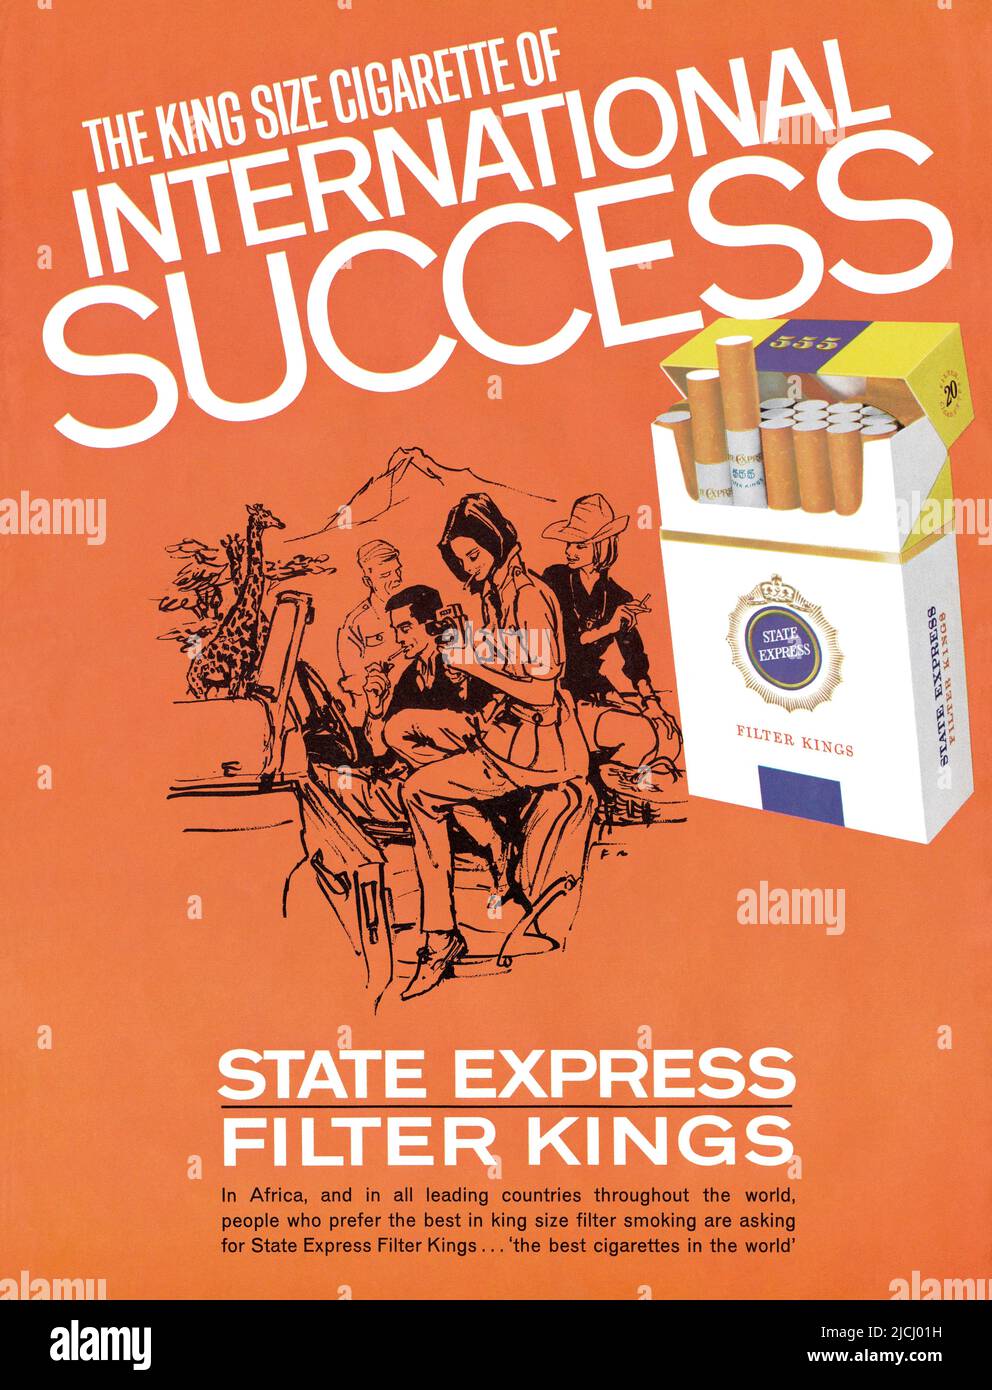 1964 U.S. advertisement for State Express 555 Filter Kings cigarettes, illustrated by Francis Marshall. Stock Photo